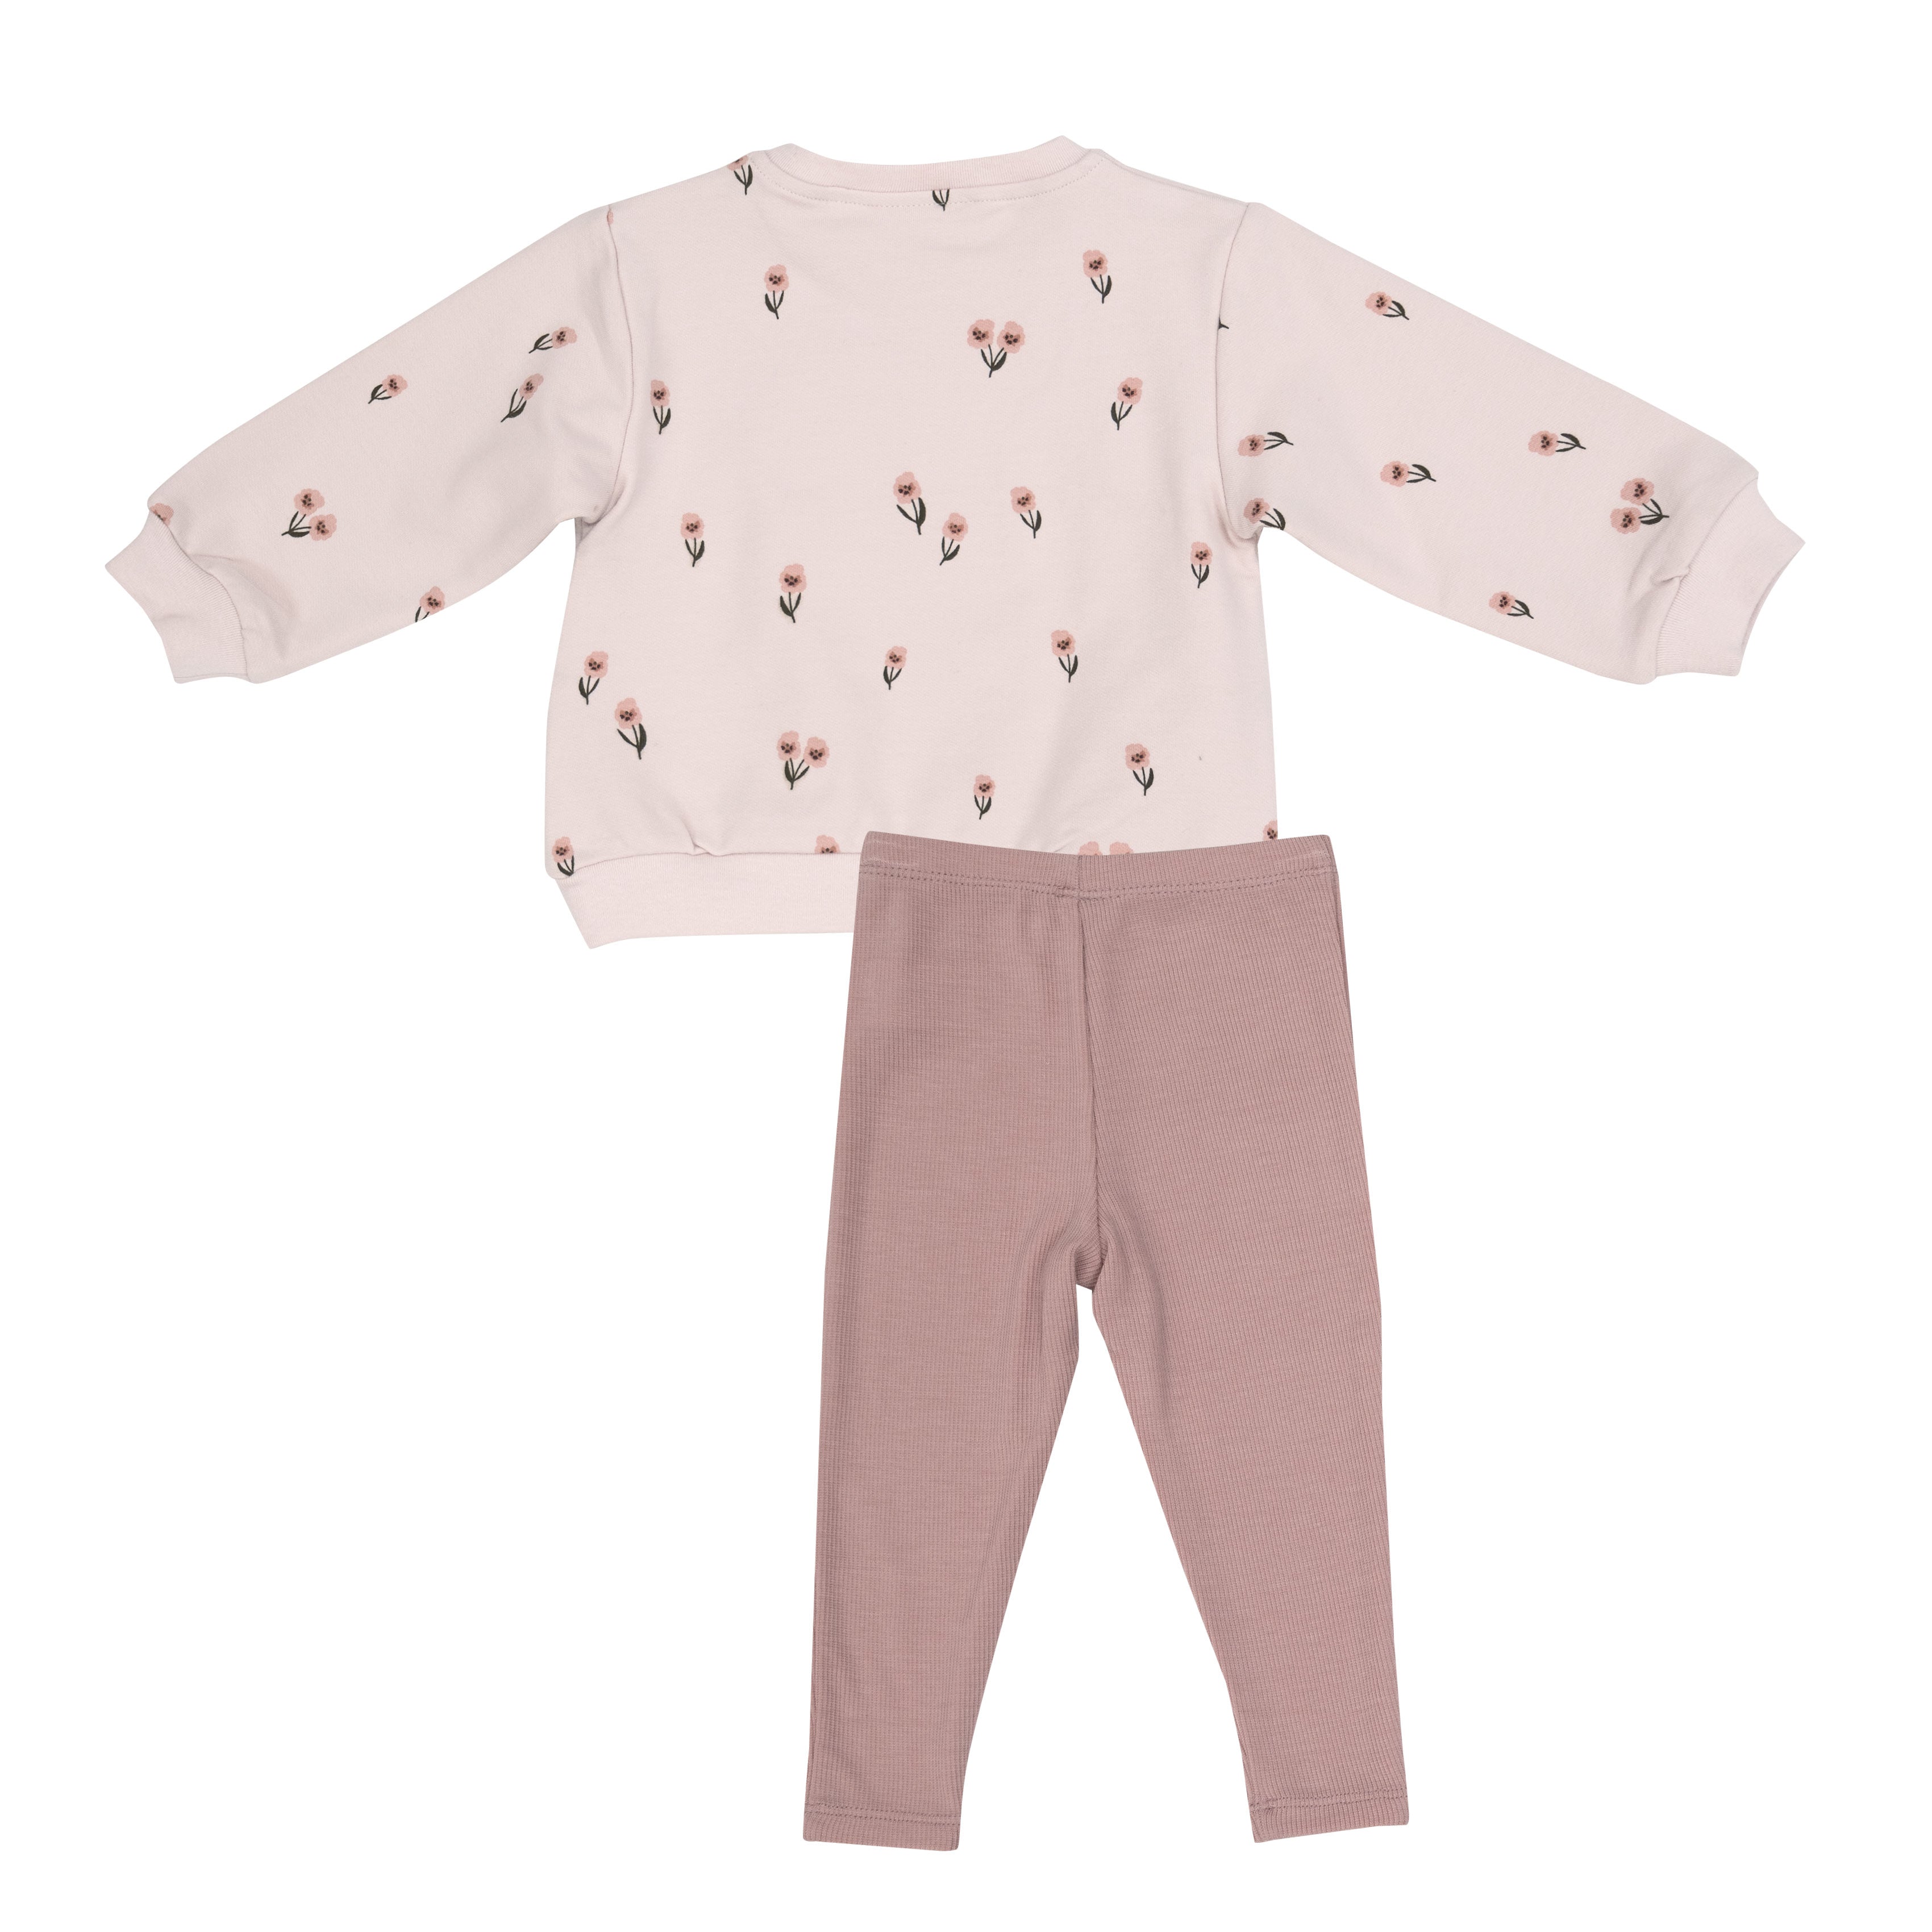 Puffy Oversized Sweatershirt And Rib Legging - Pretty Pink Floral